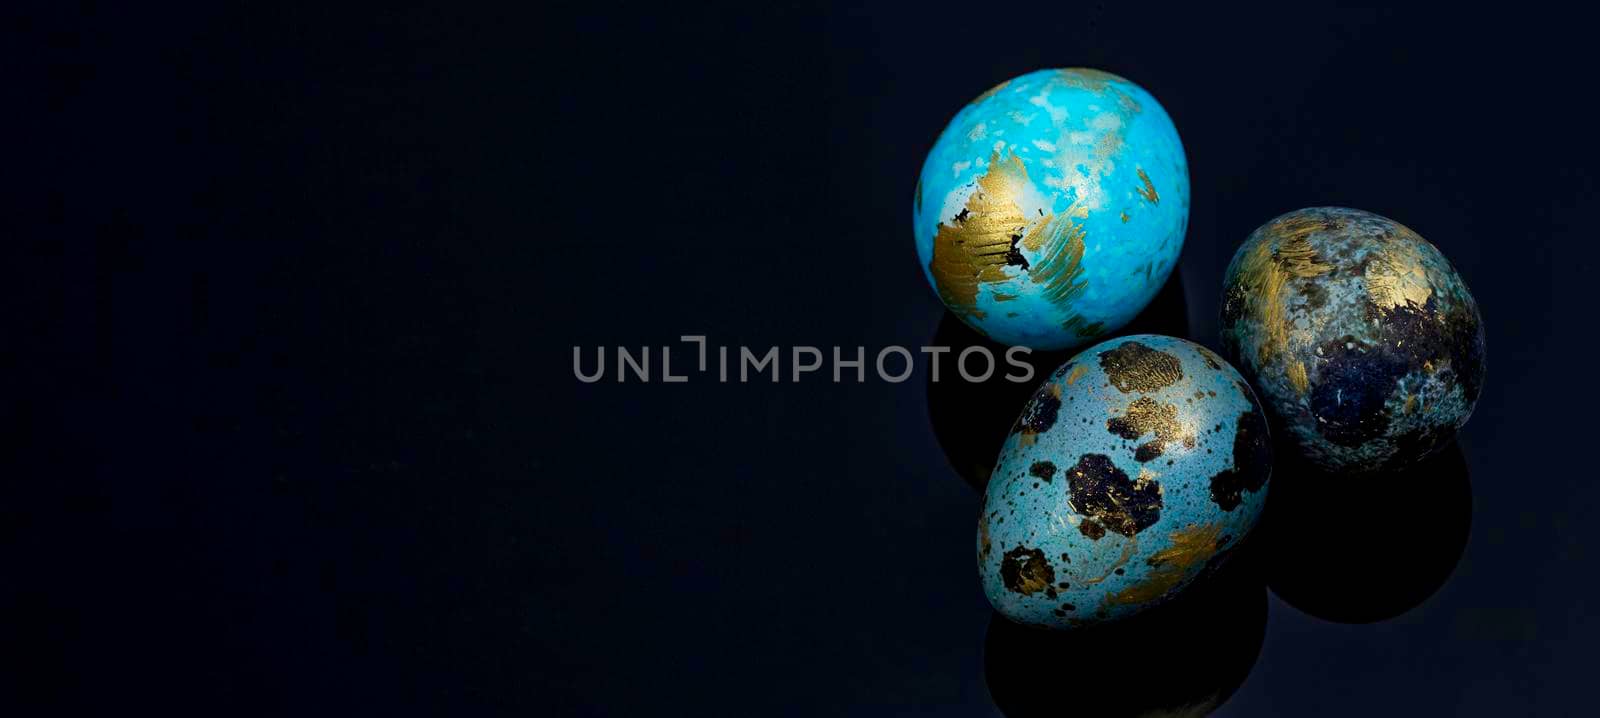 Easter quail eggs painted by hand in blue and gold color on the black surface. by galinasharapova